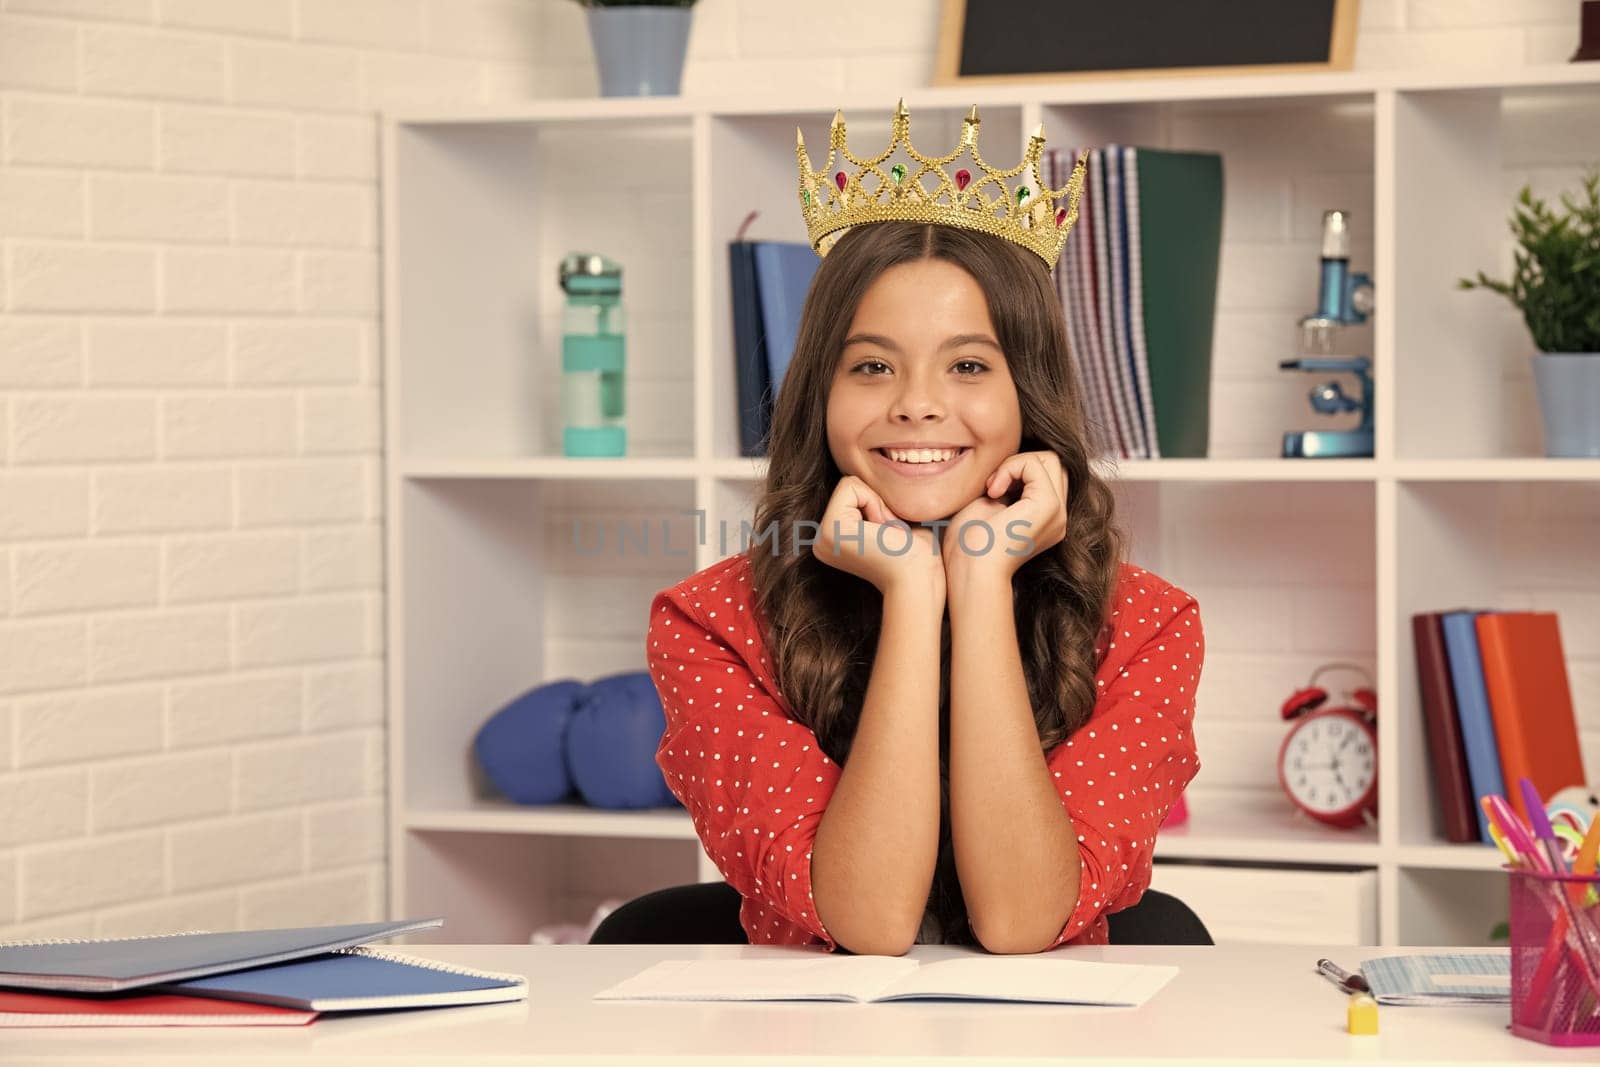 Princess school girl. Teenager princess child celebrates success win and victory. Teen girl in queen crown. Happy girl smiling